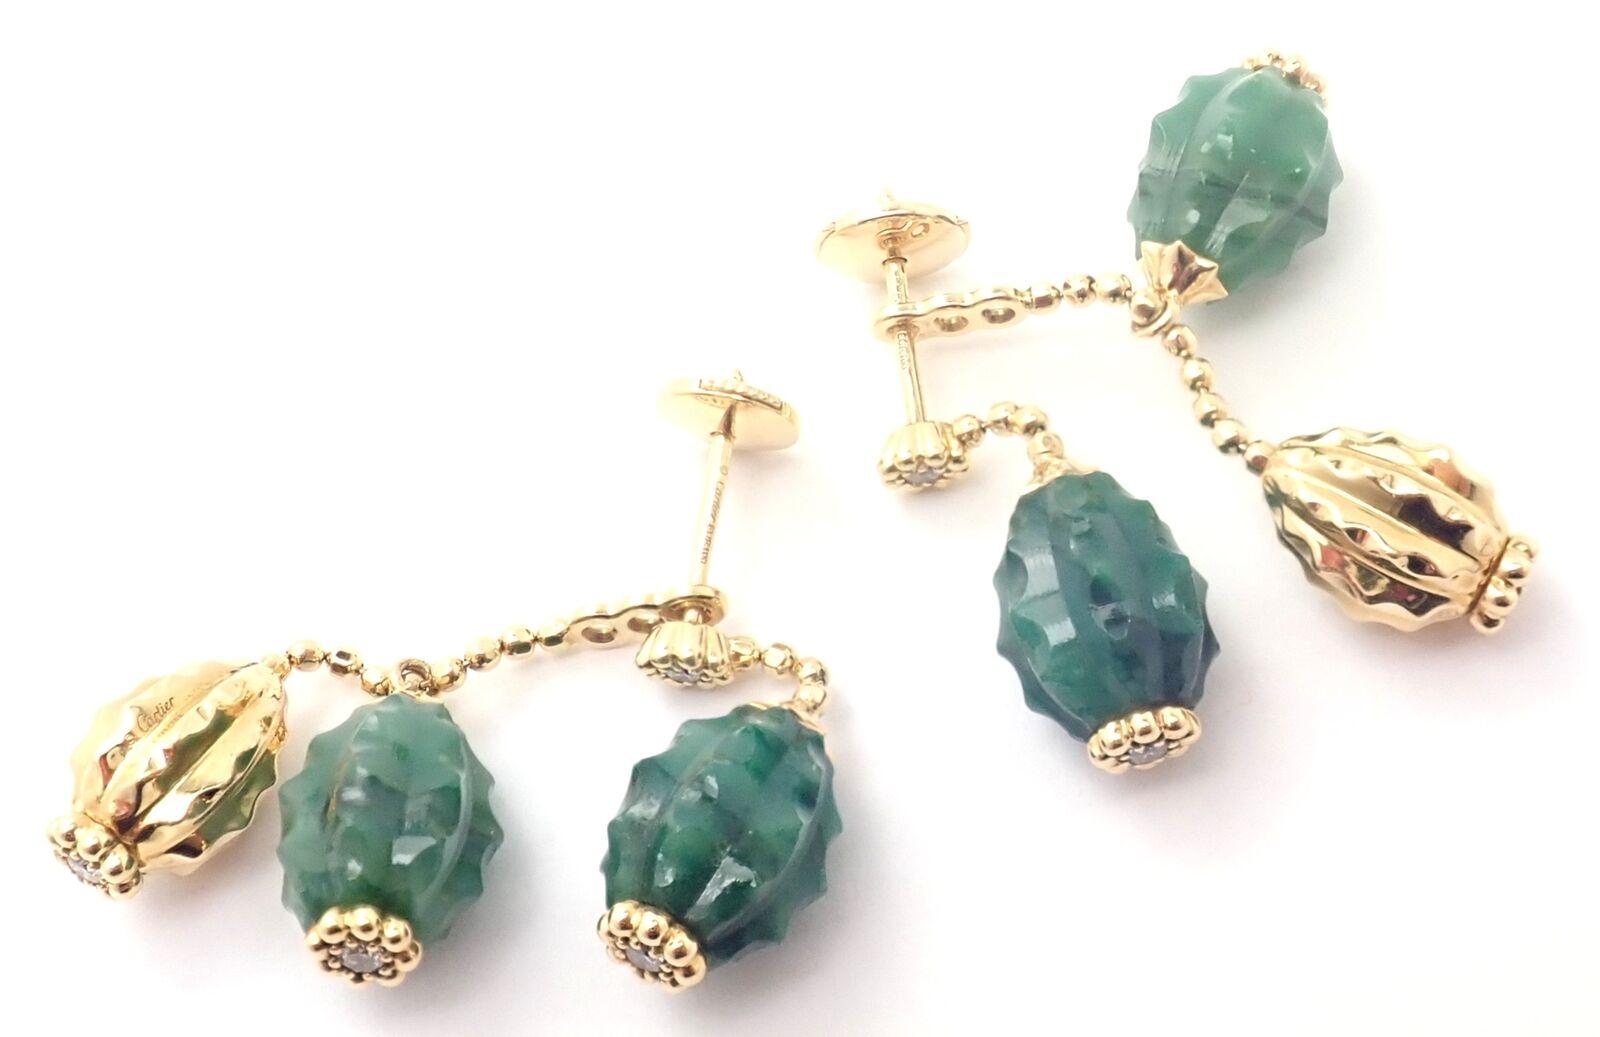 Cactus de Cartier Diamond Aventurine Yellow Gold Drop Earrings In Excellent Condition For Sale In Holland, PA